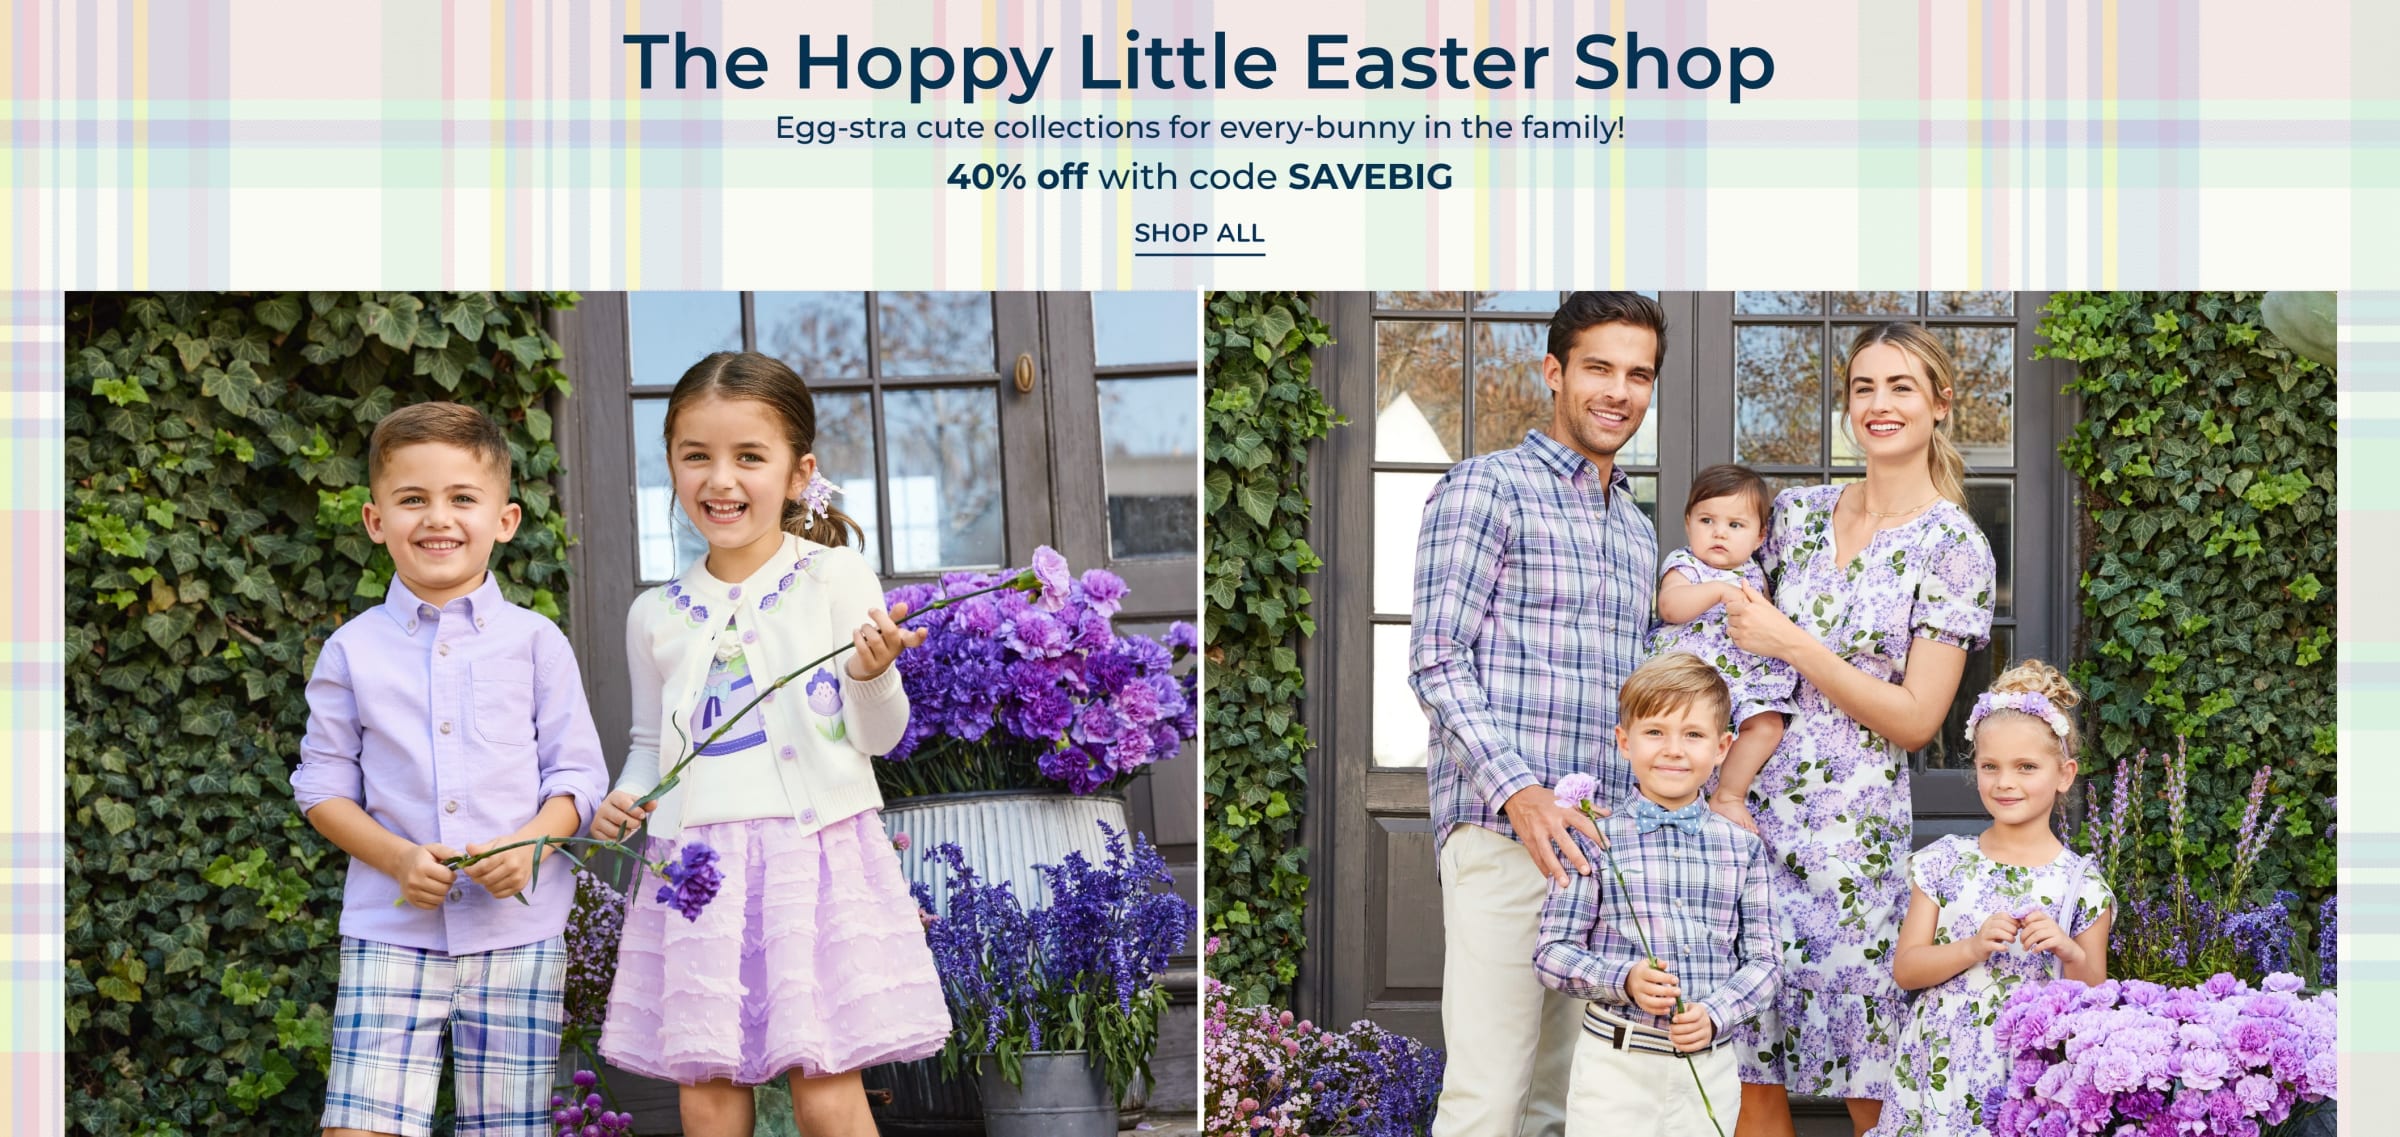 The Hoppy Little Easter Shop | Egg-stra cute collections for every-bunny in the family! 40% off with code SAVEBIG